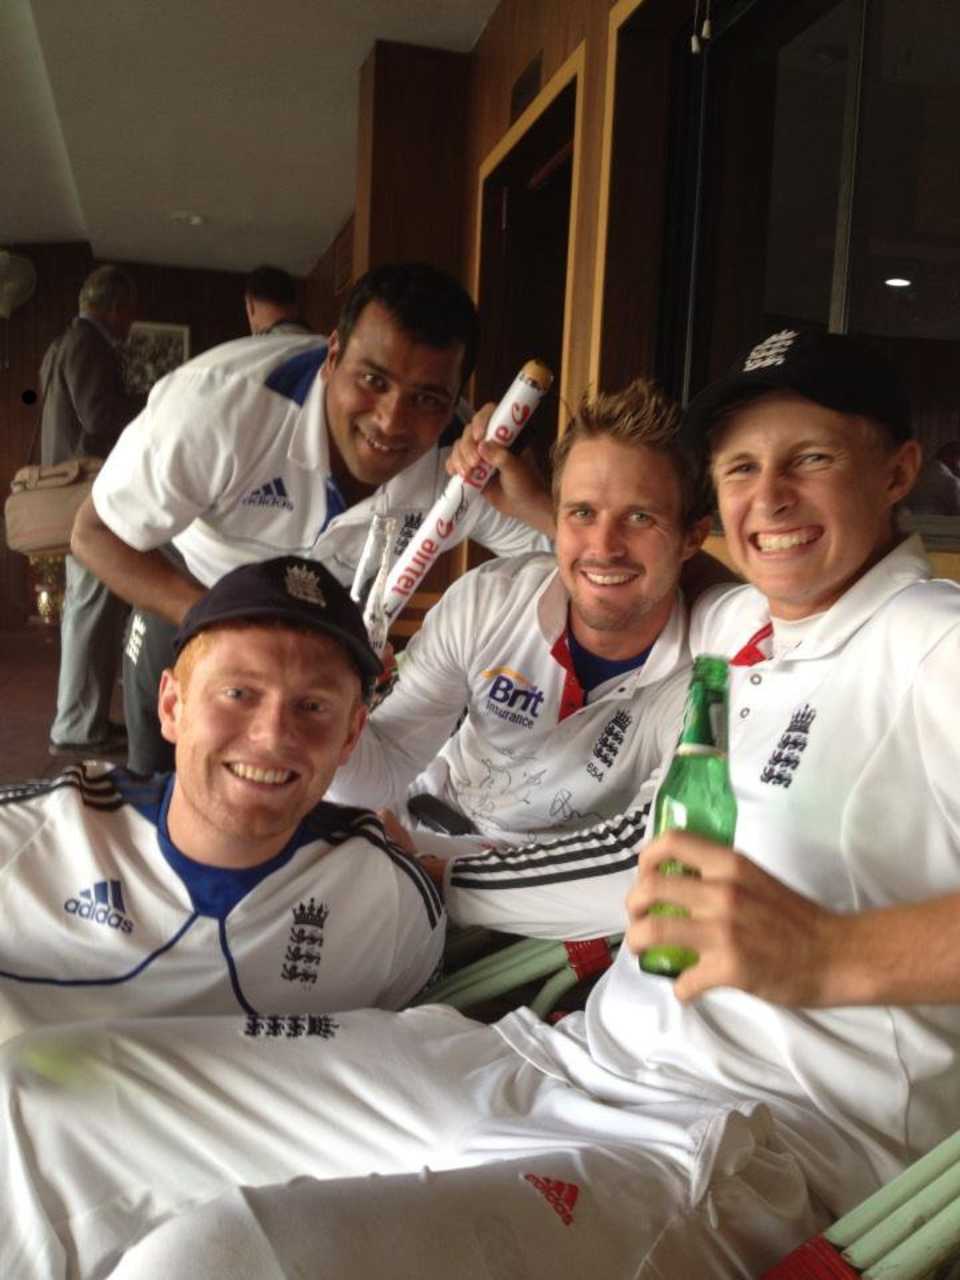 Nick Compton, Joe Root, Samit Patel and Jonny Bairstow relax after victory, celebrates the series win, India v England, 4th Test, Nagpur, 5th day, December 17, 2012